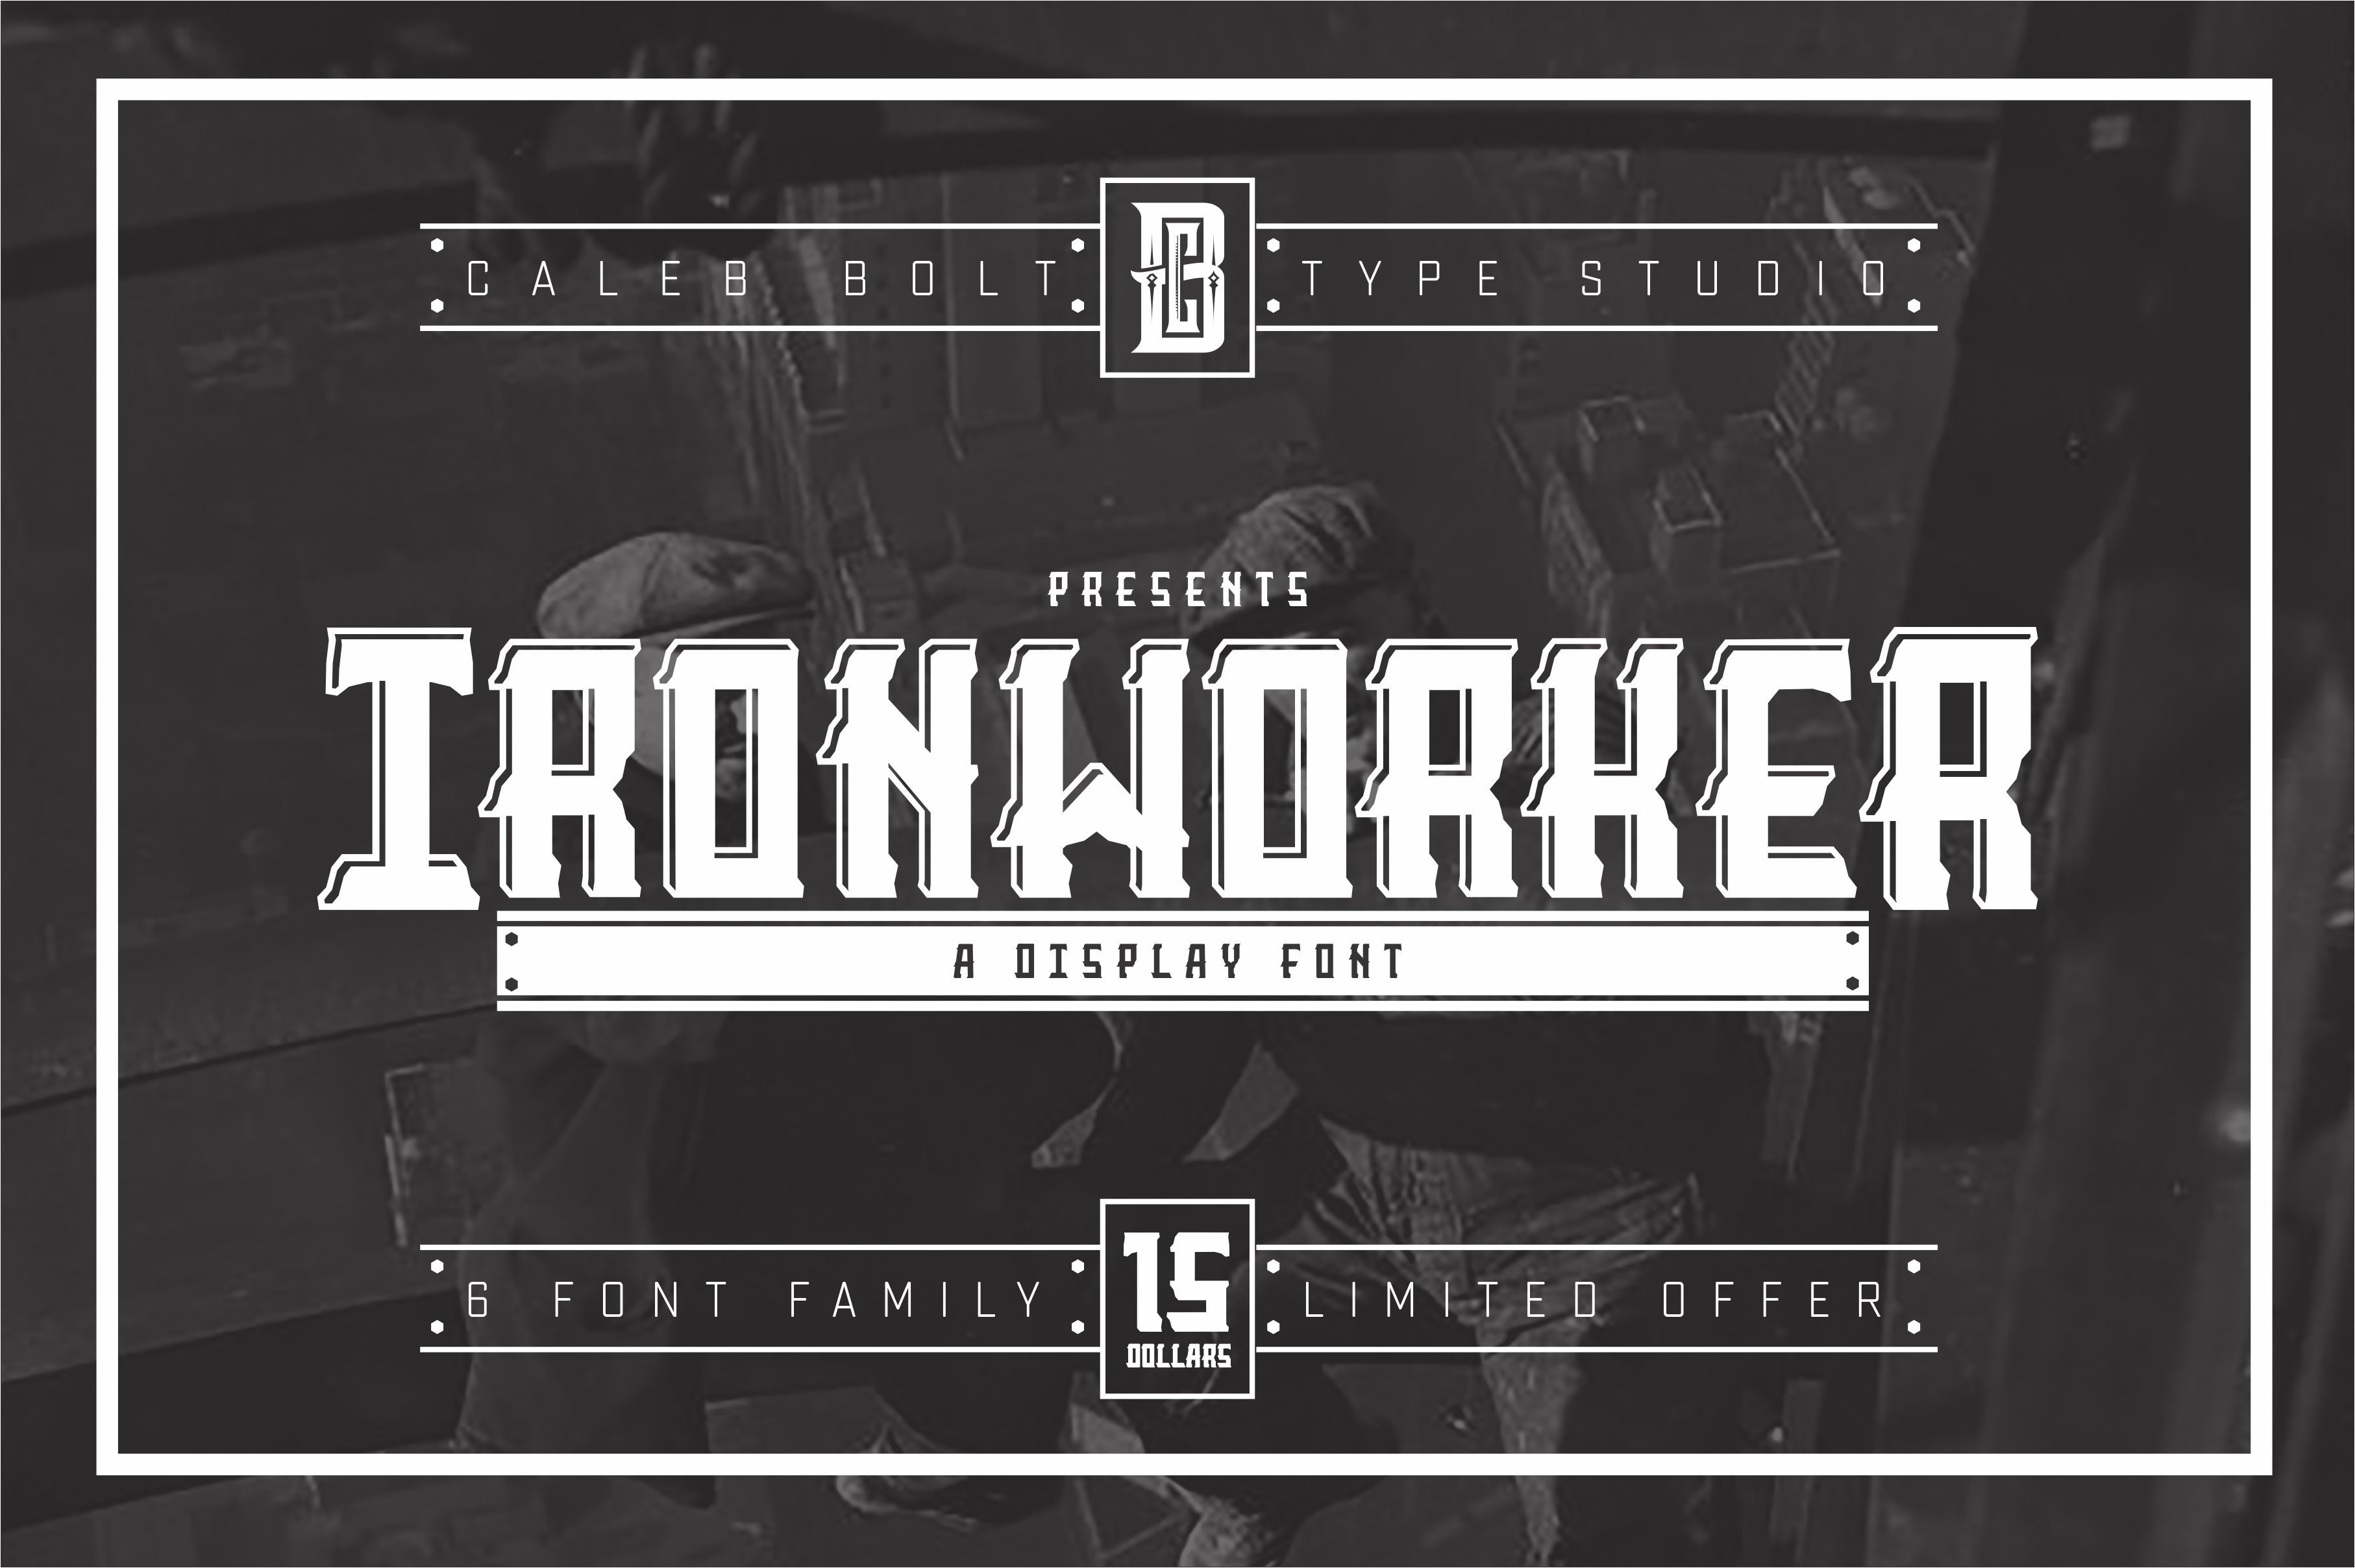 Ironworker Display font cover image.